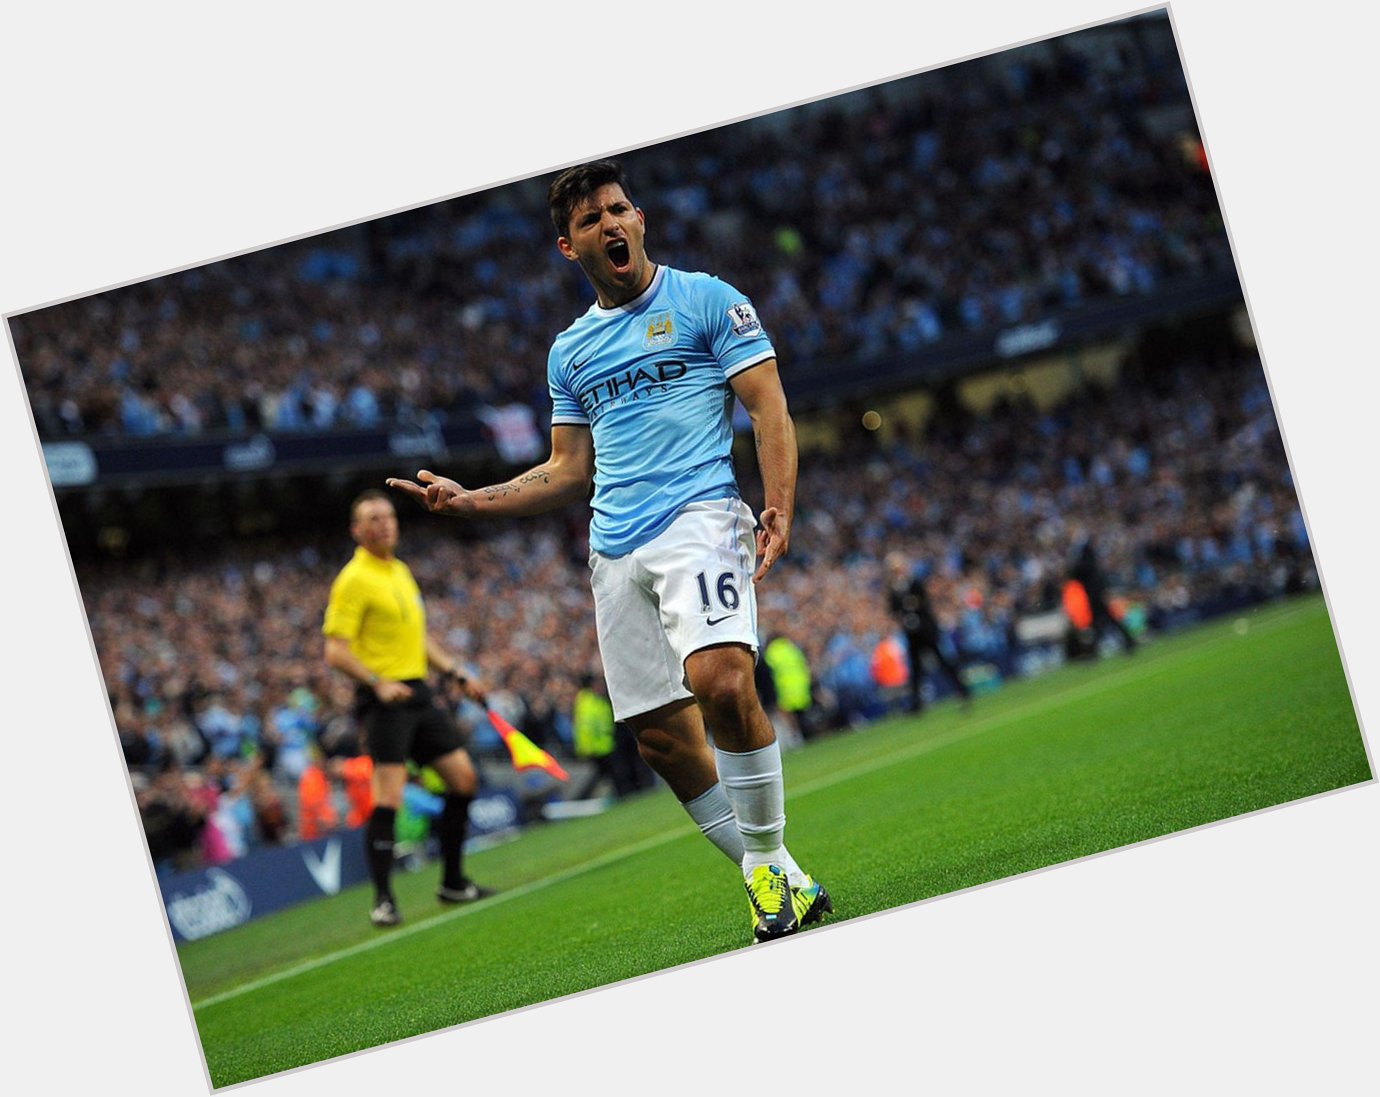 Happy Birthday Sergio Aguero - a privilege to watch in blue every week & hopefully for many more years to come! 